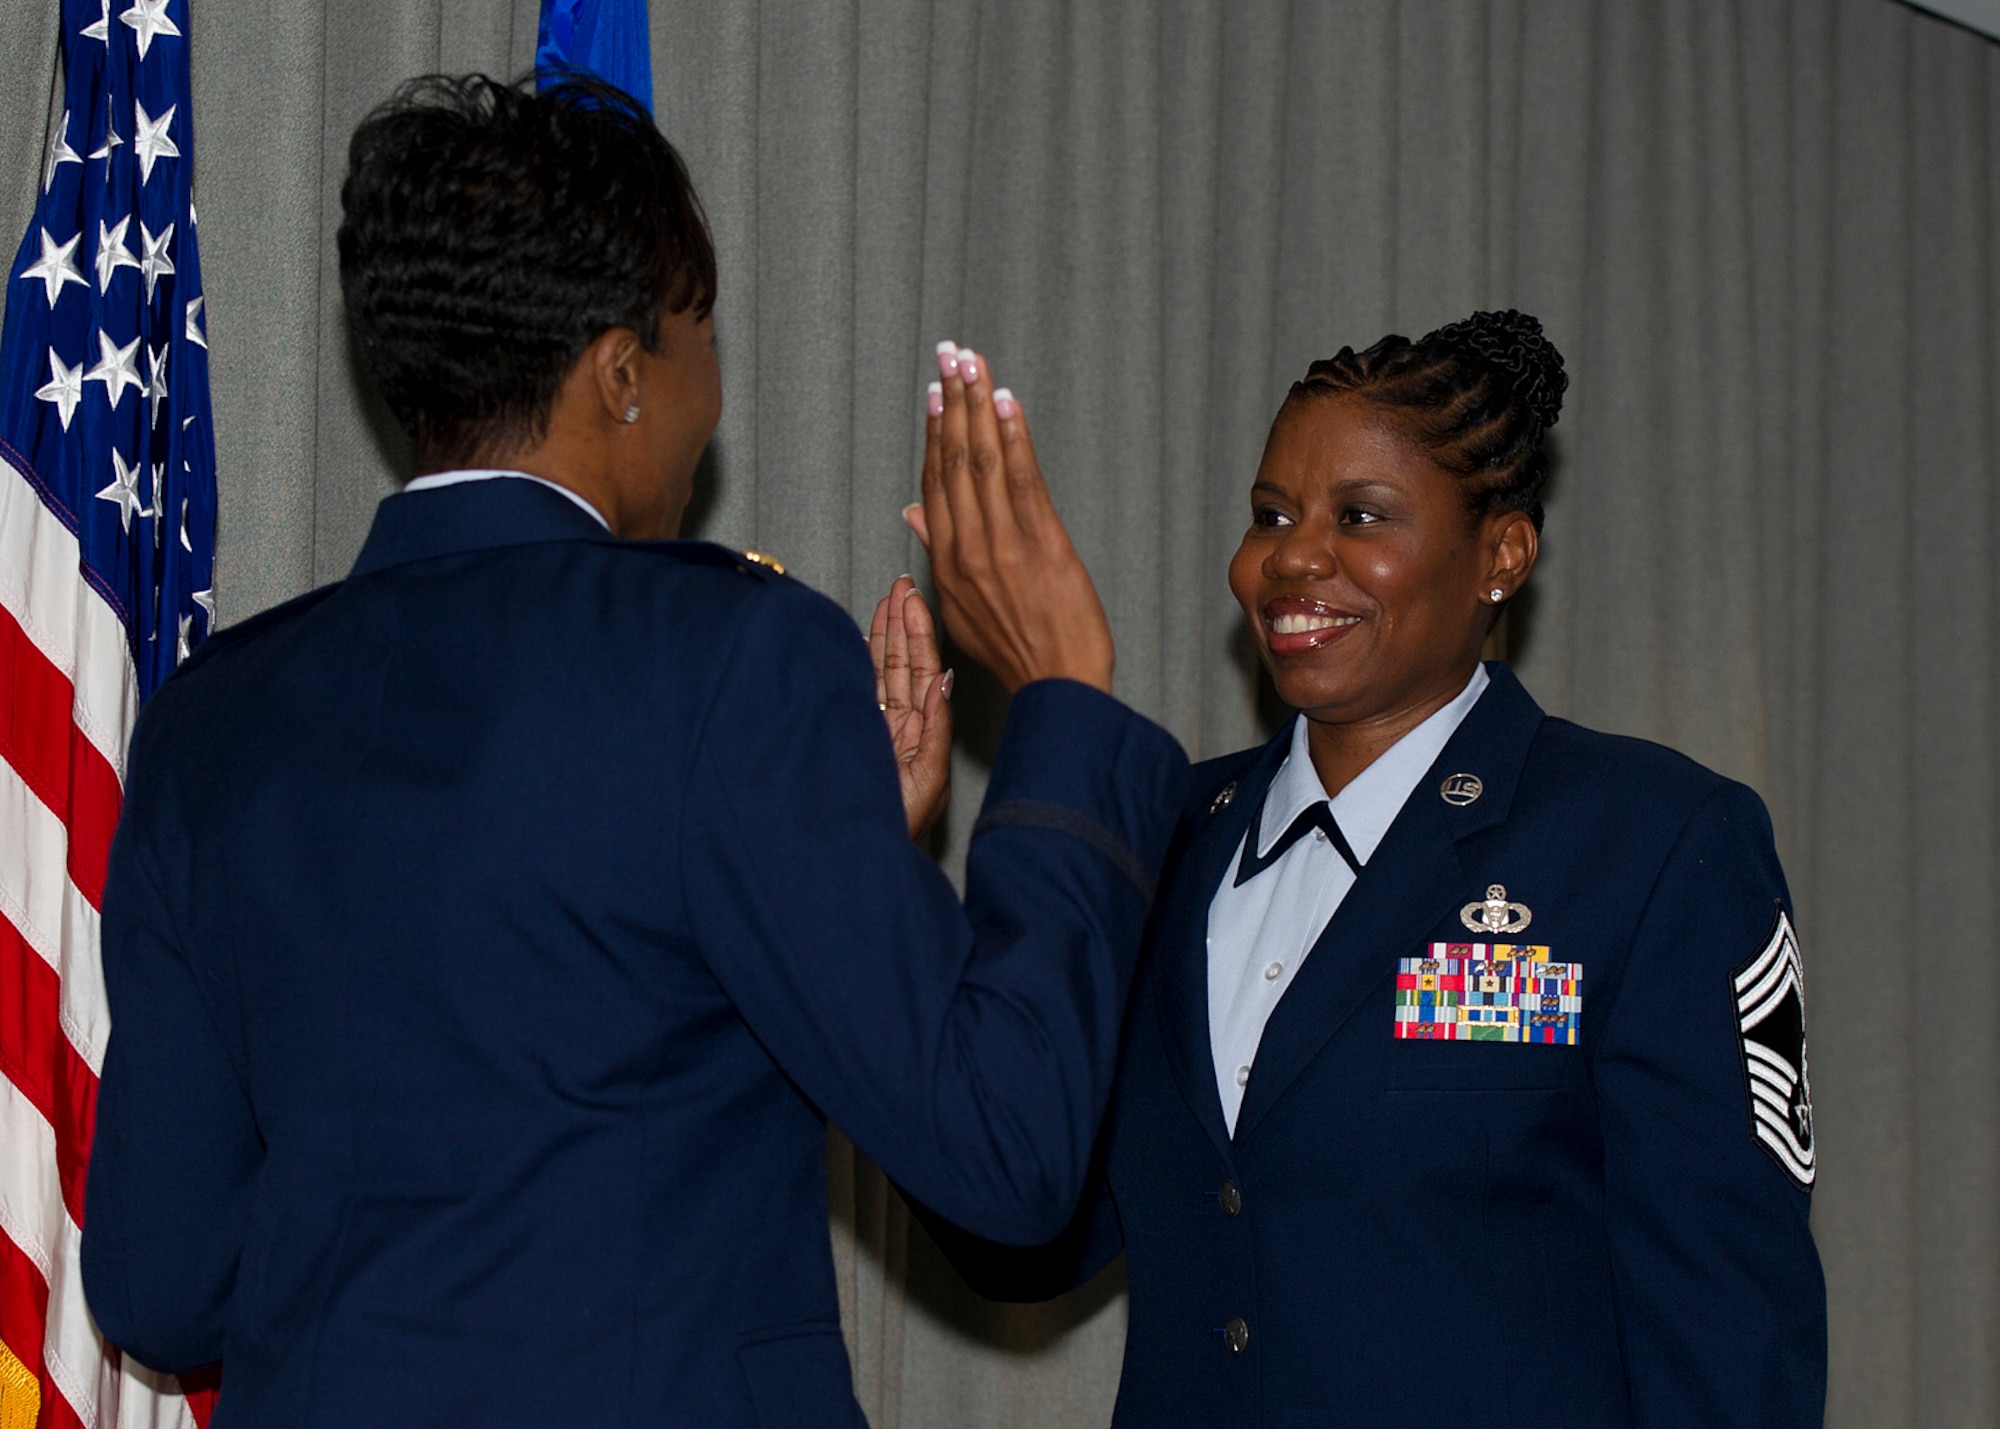 Chief Master Sgt. Jacinda Rivers, Air Force Special Operations Command command and control functional manager, right, raises her hand during her promotion ceremony to chief master sergeant during at ceremony at Hurlburt Field, Fla., July 27, 2012. The rank of chief master sergeant is limited by federal law to only one percent of the Air Force enlisted force. (U.S. Air Force photo / Airman 1st Class Christopher Callaway)